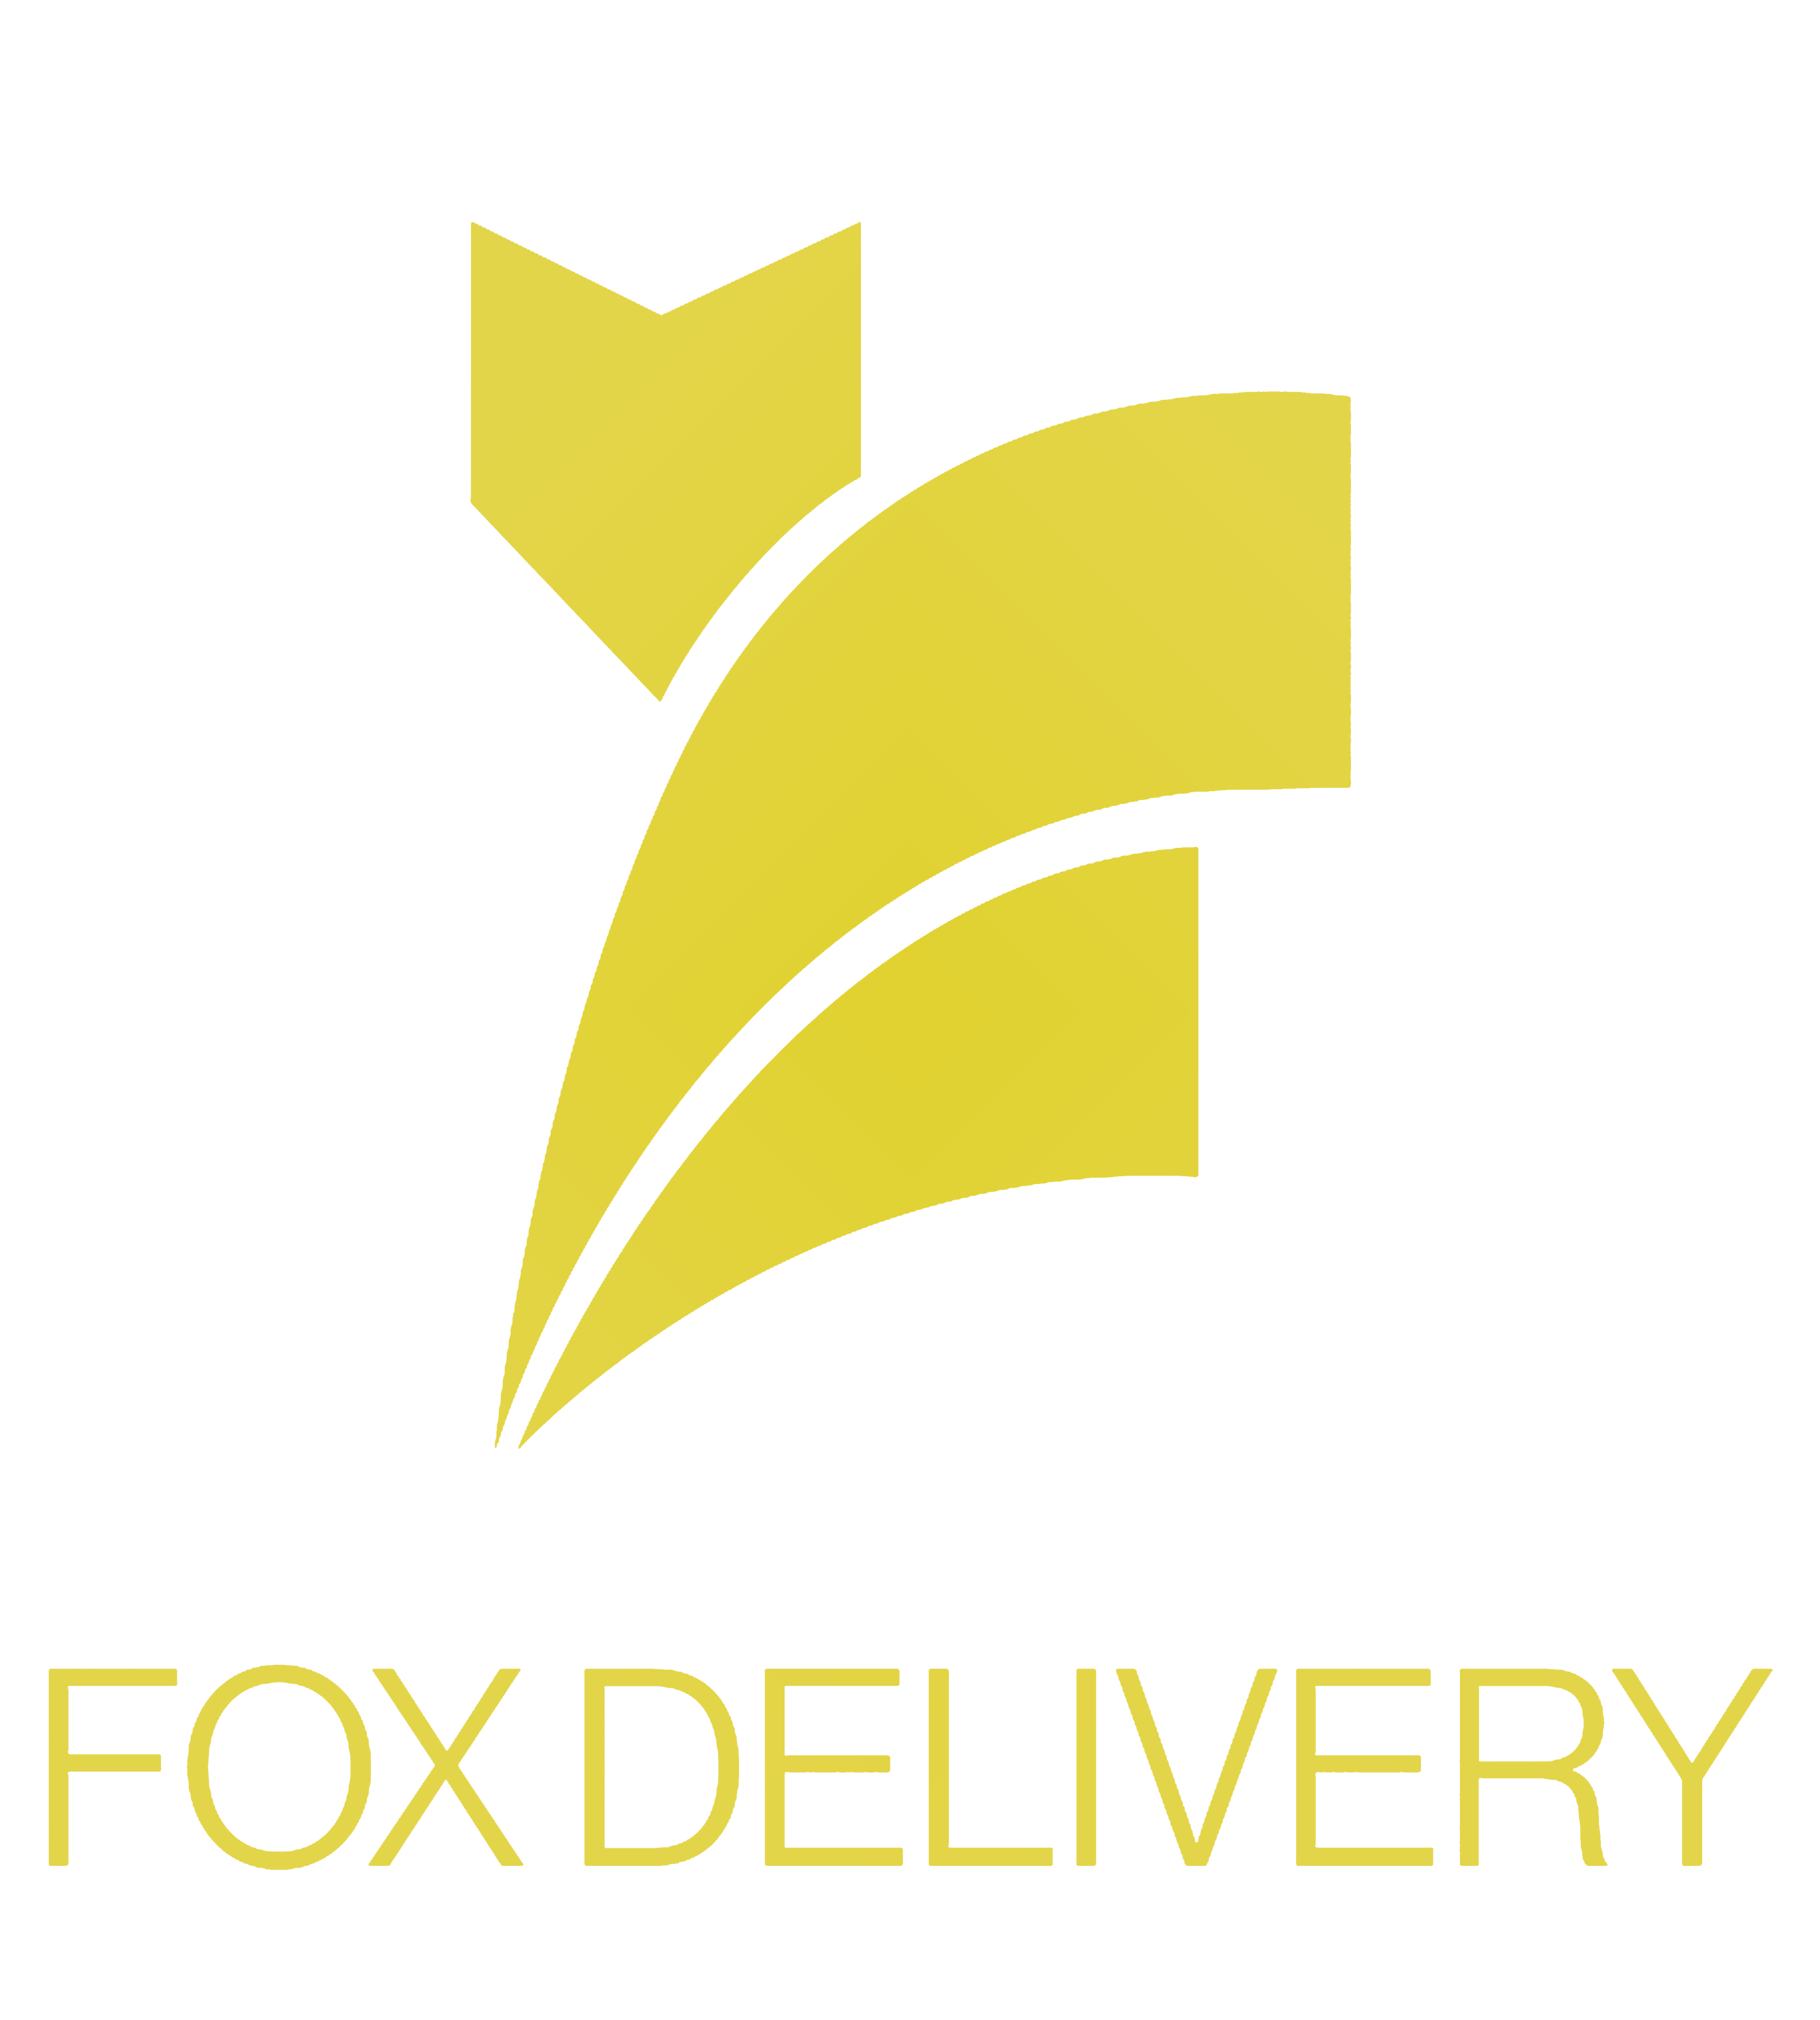 https://foxdelivery.net/contact-us/